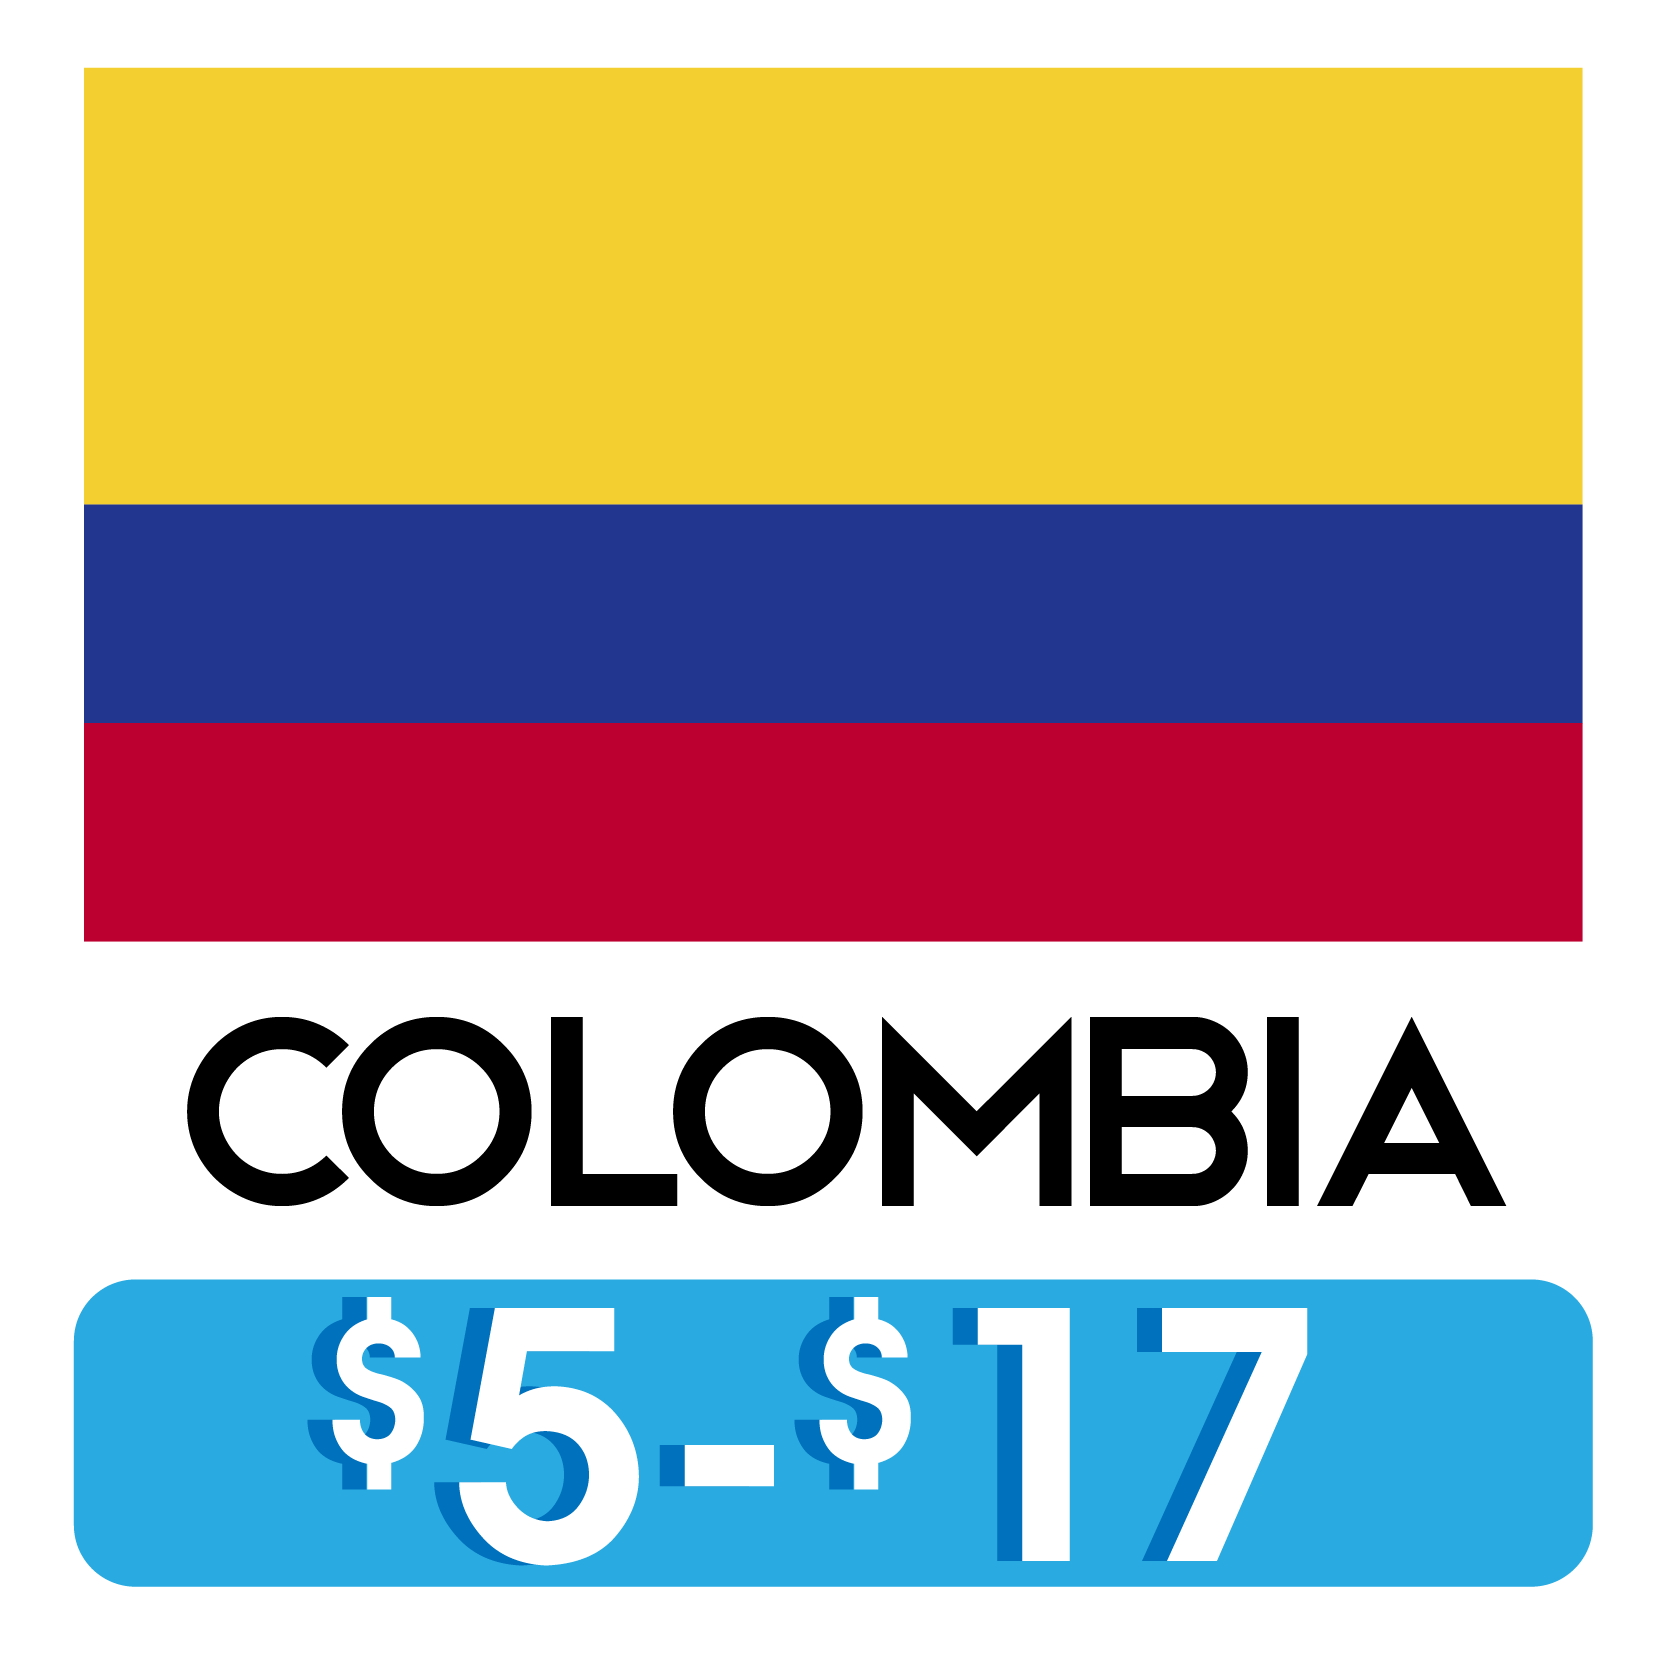 Costos_Hostales_COLOMBIA.png